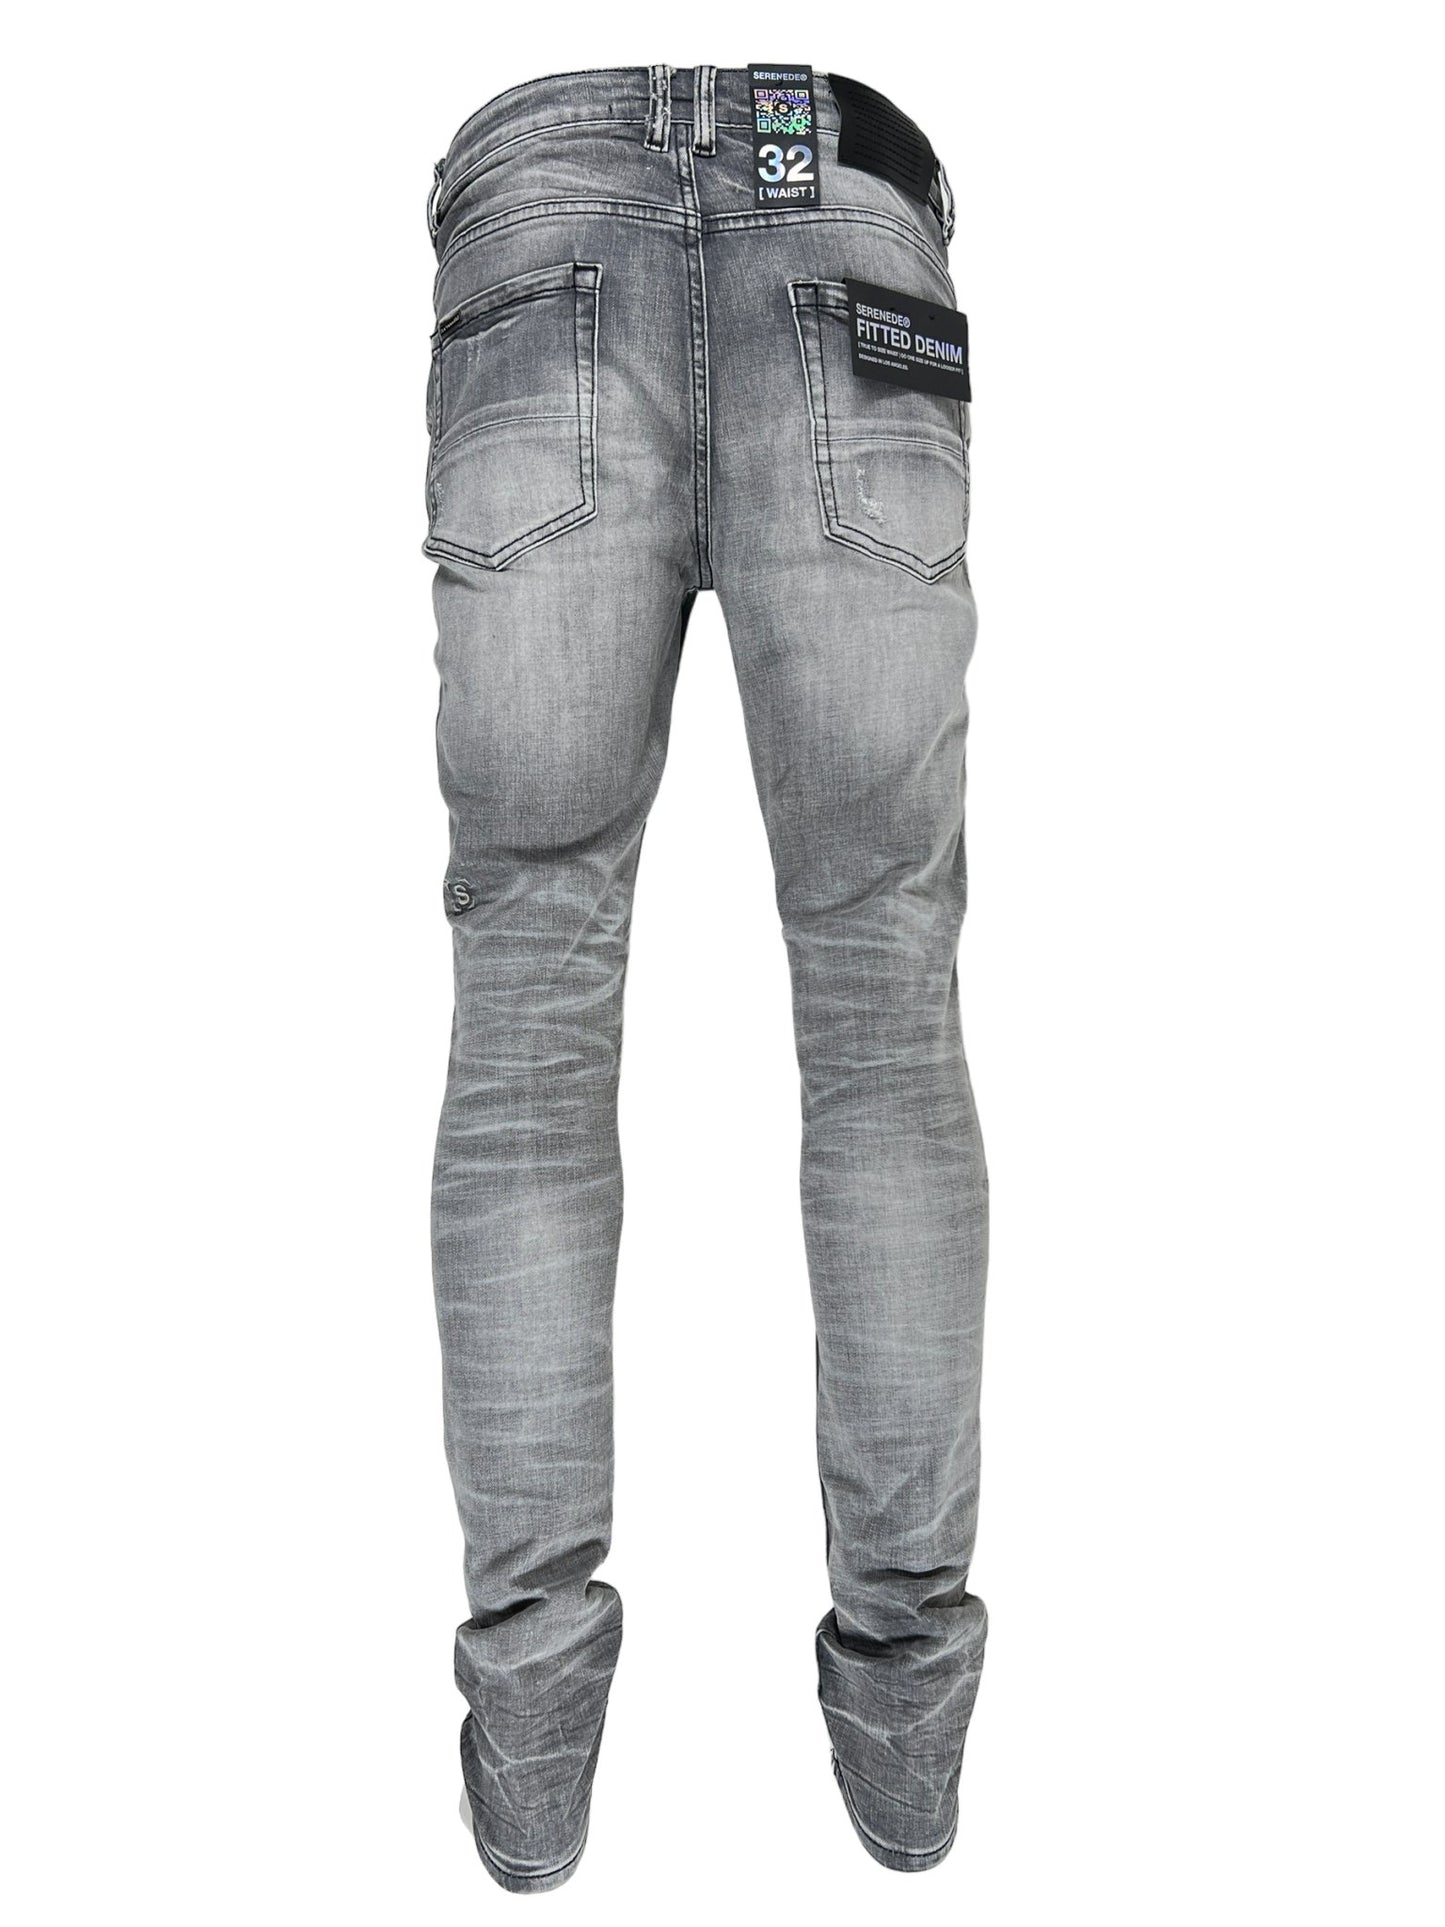 Pair of SERENEDE TITAN JEANS GREY isolated on a white background.